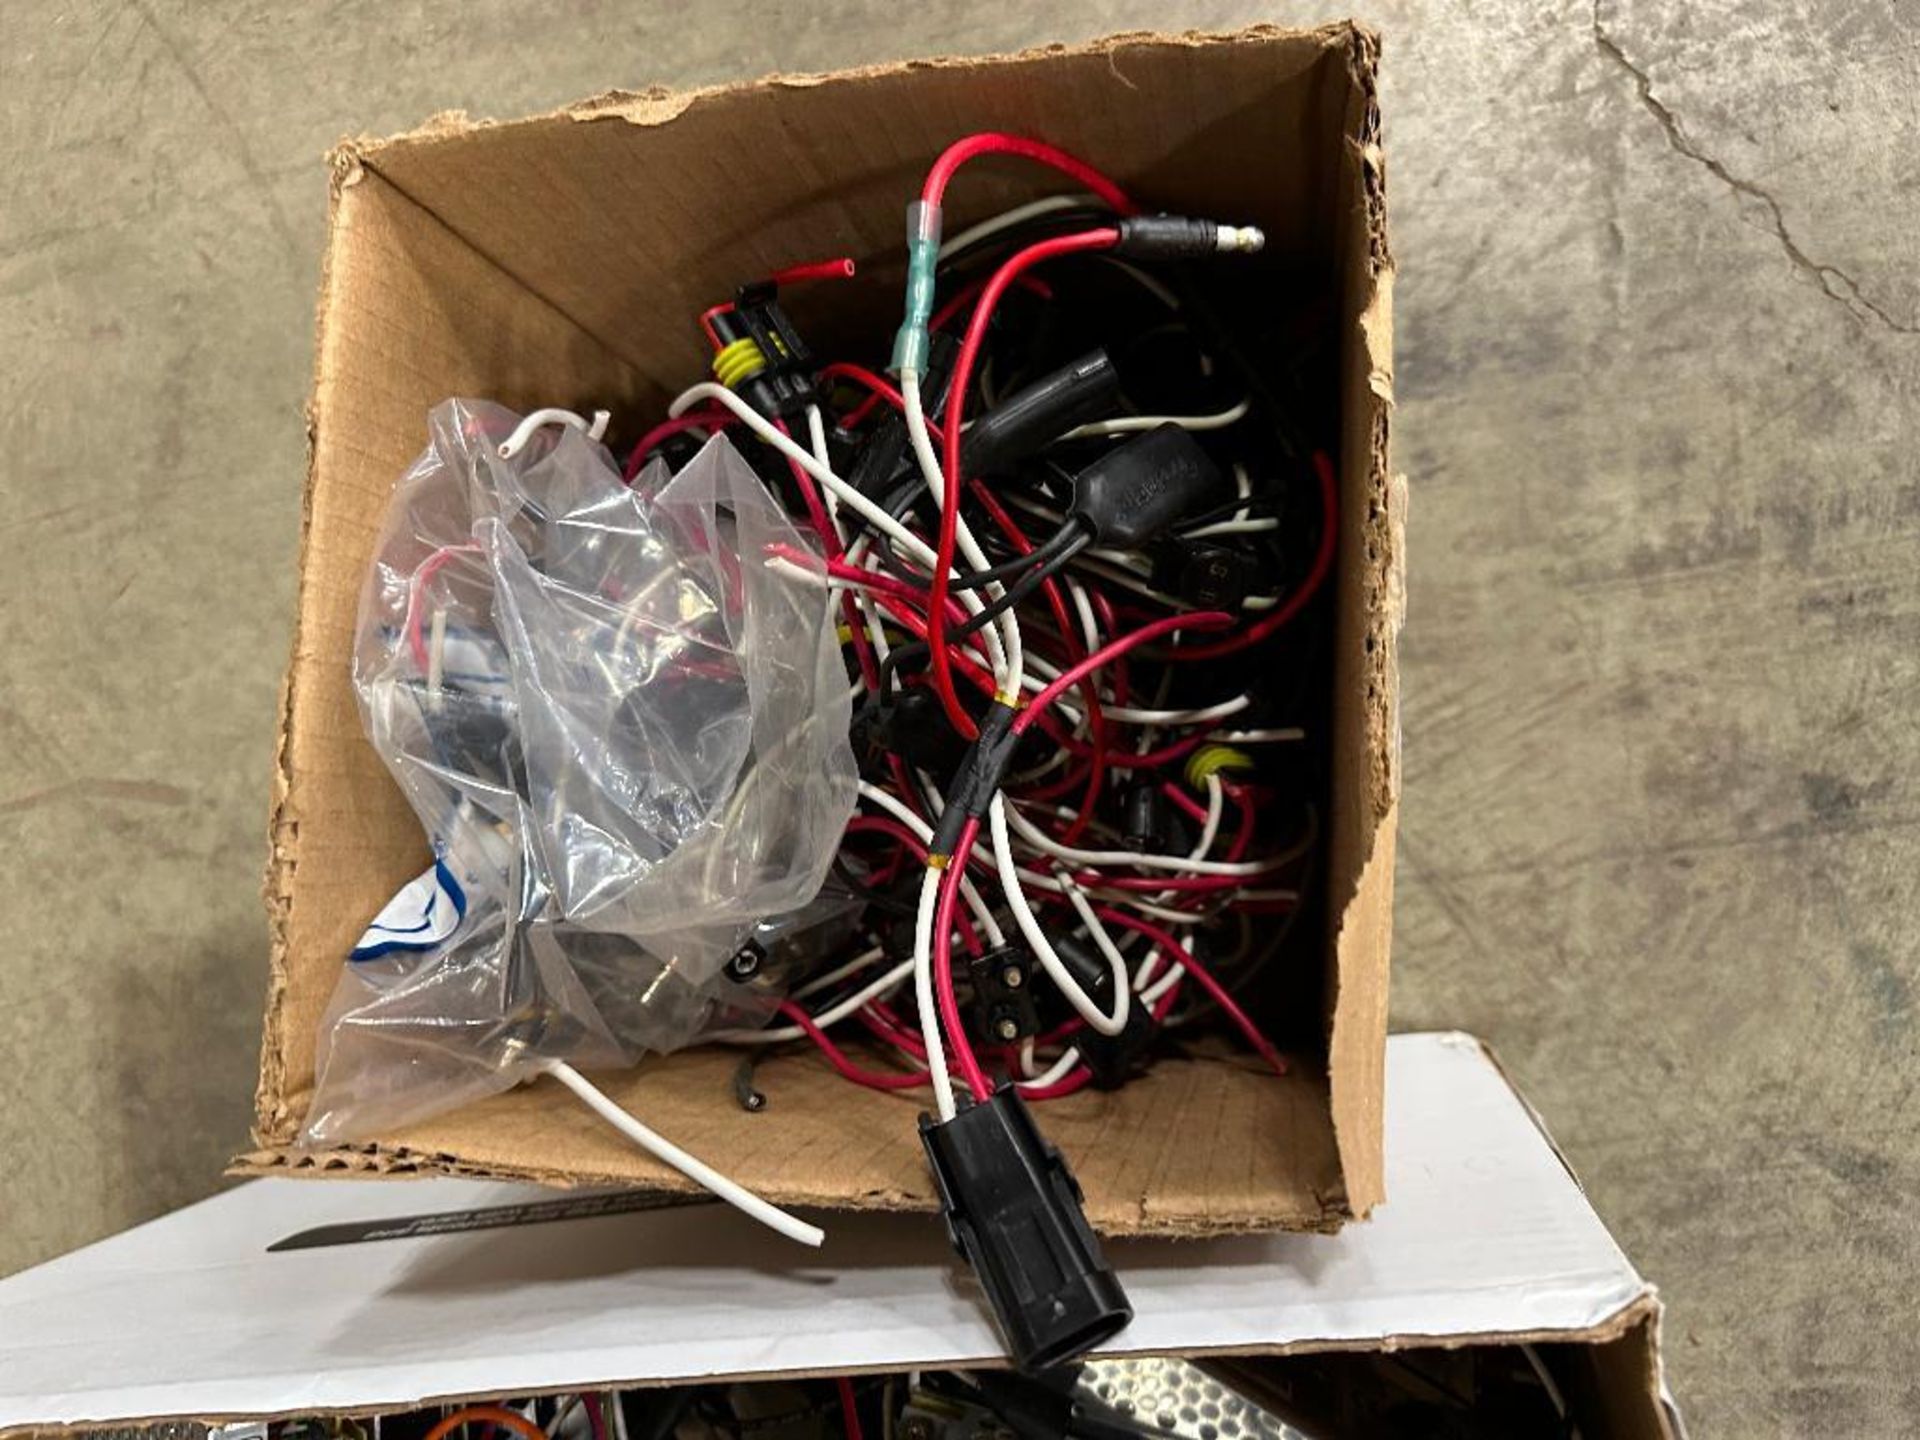 Lot of (2) Boxes of Asst. Mean Well Power Supplies and (1) Box of Asst. Wiring - Image 6 of 6